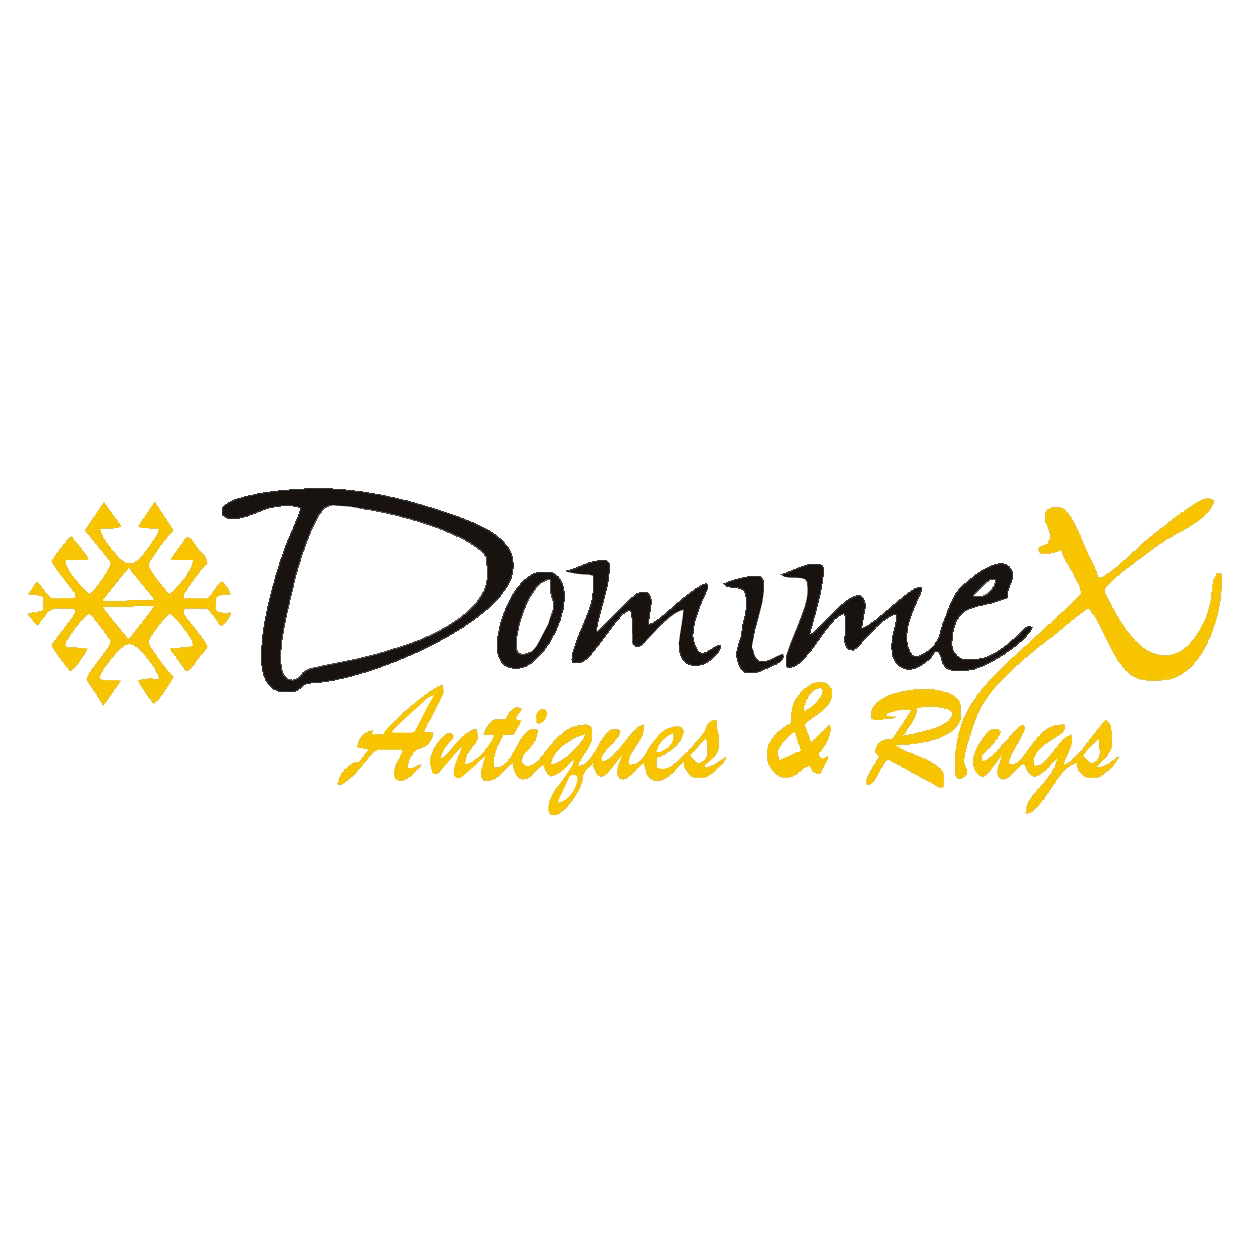 DOMIMEX ANTIQUES & RUGS Logo